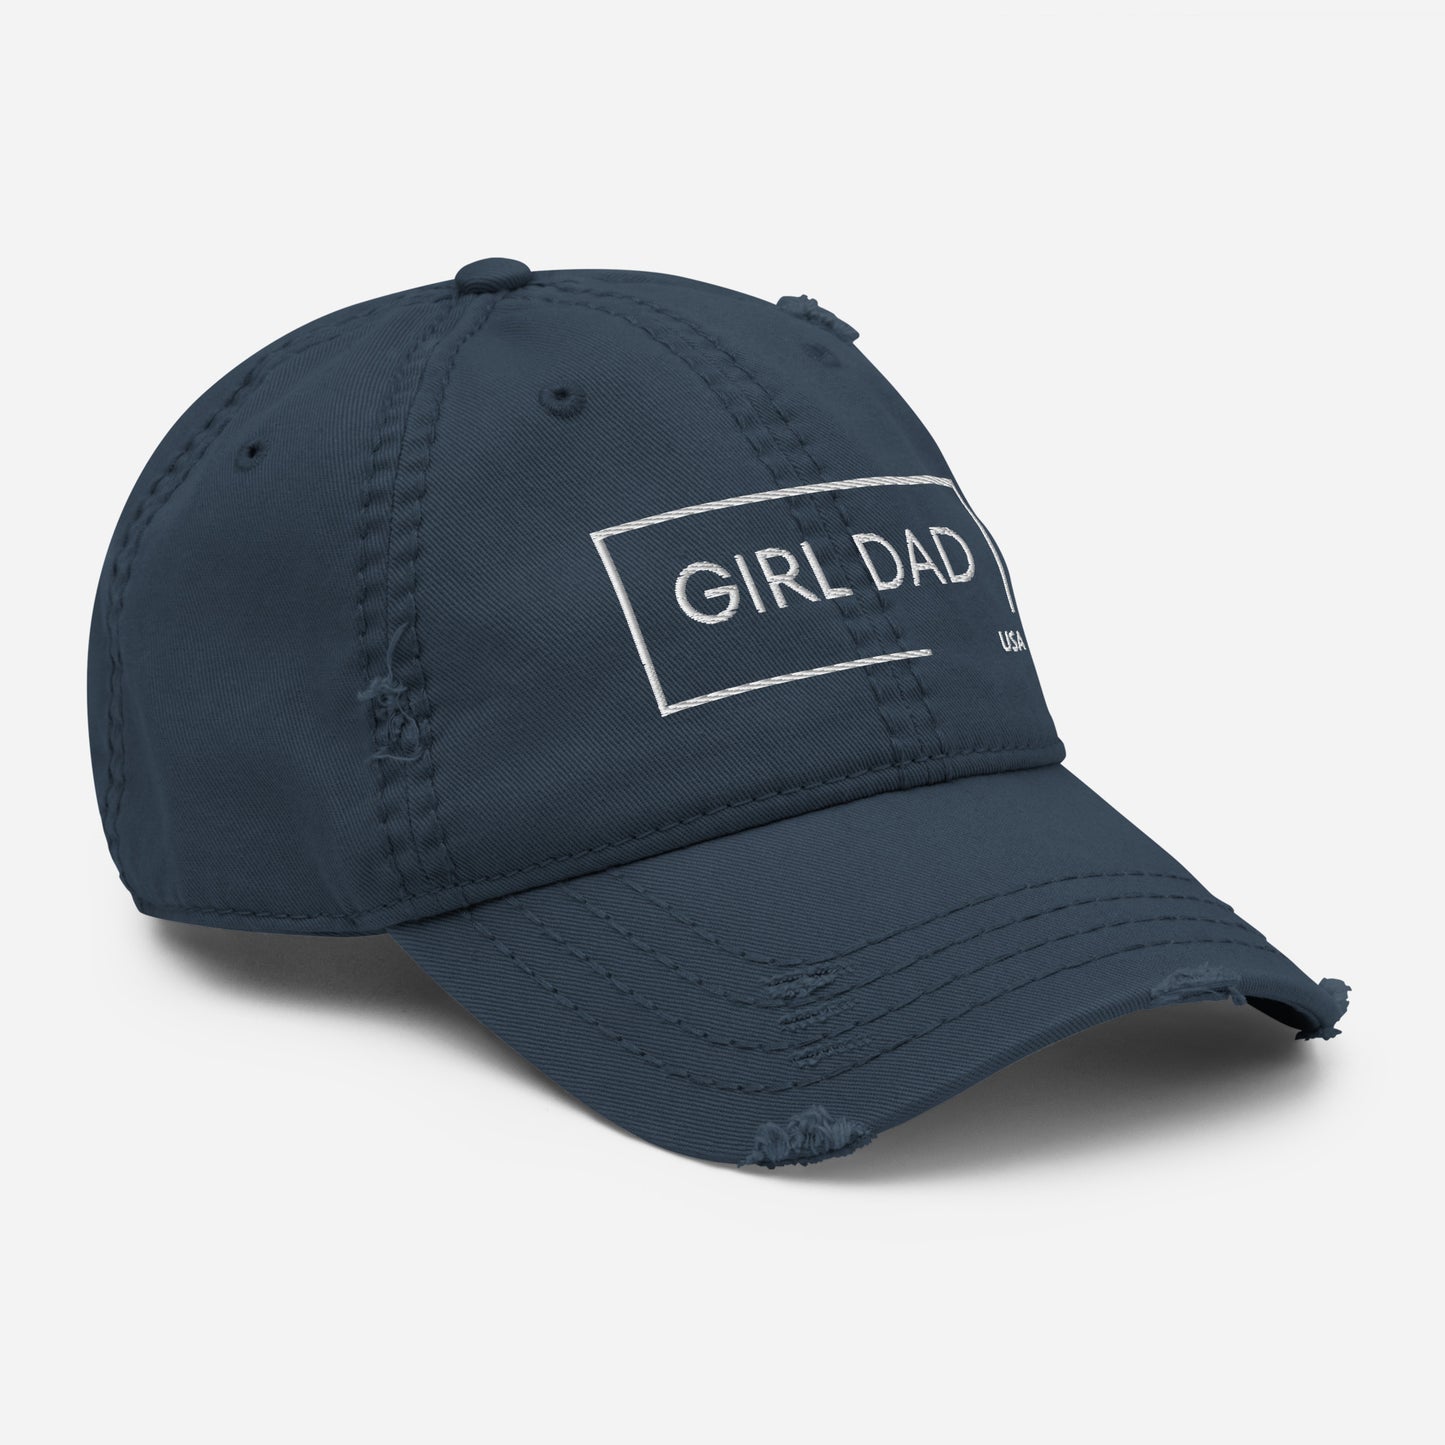 Girl Dad USA - Distressed Dad Hat